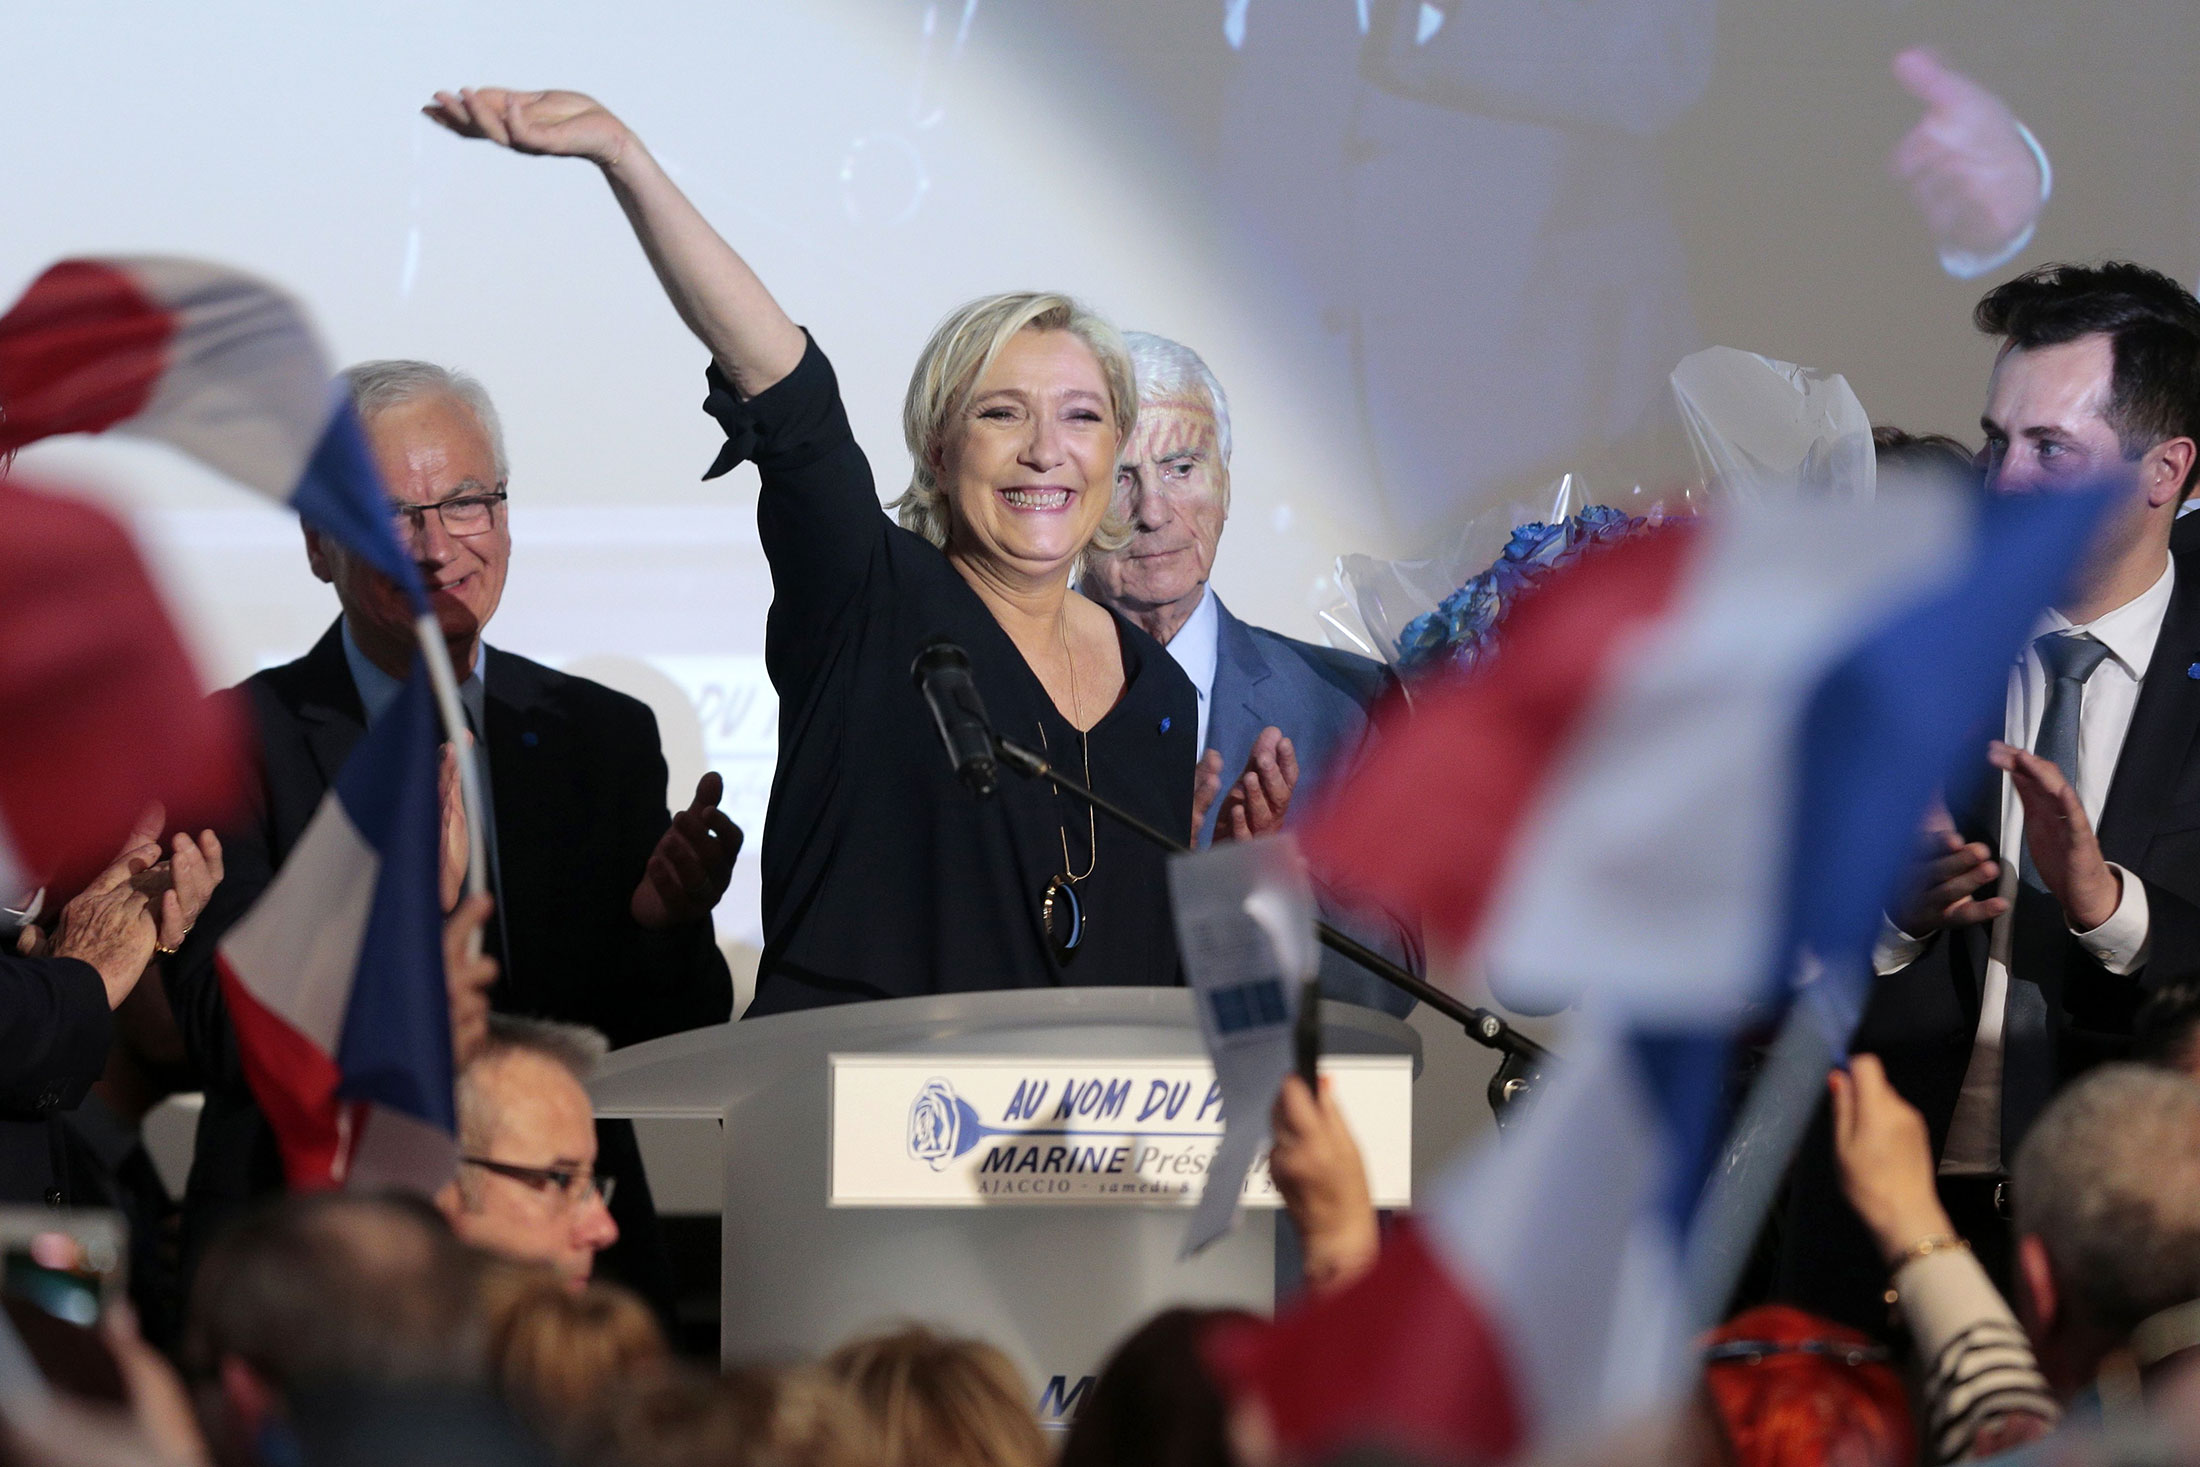 Extreme Views on Race Still Cling to French Candidate Marine Le Pen -  Bloomberg